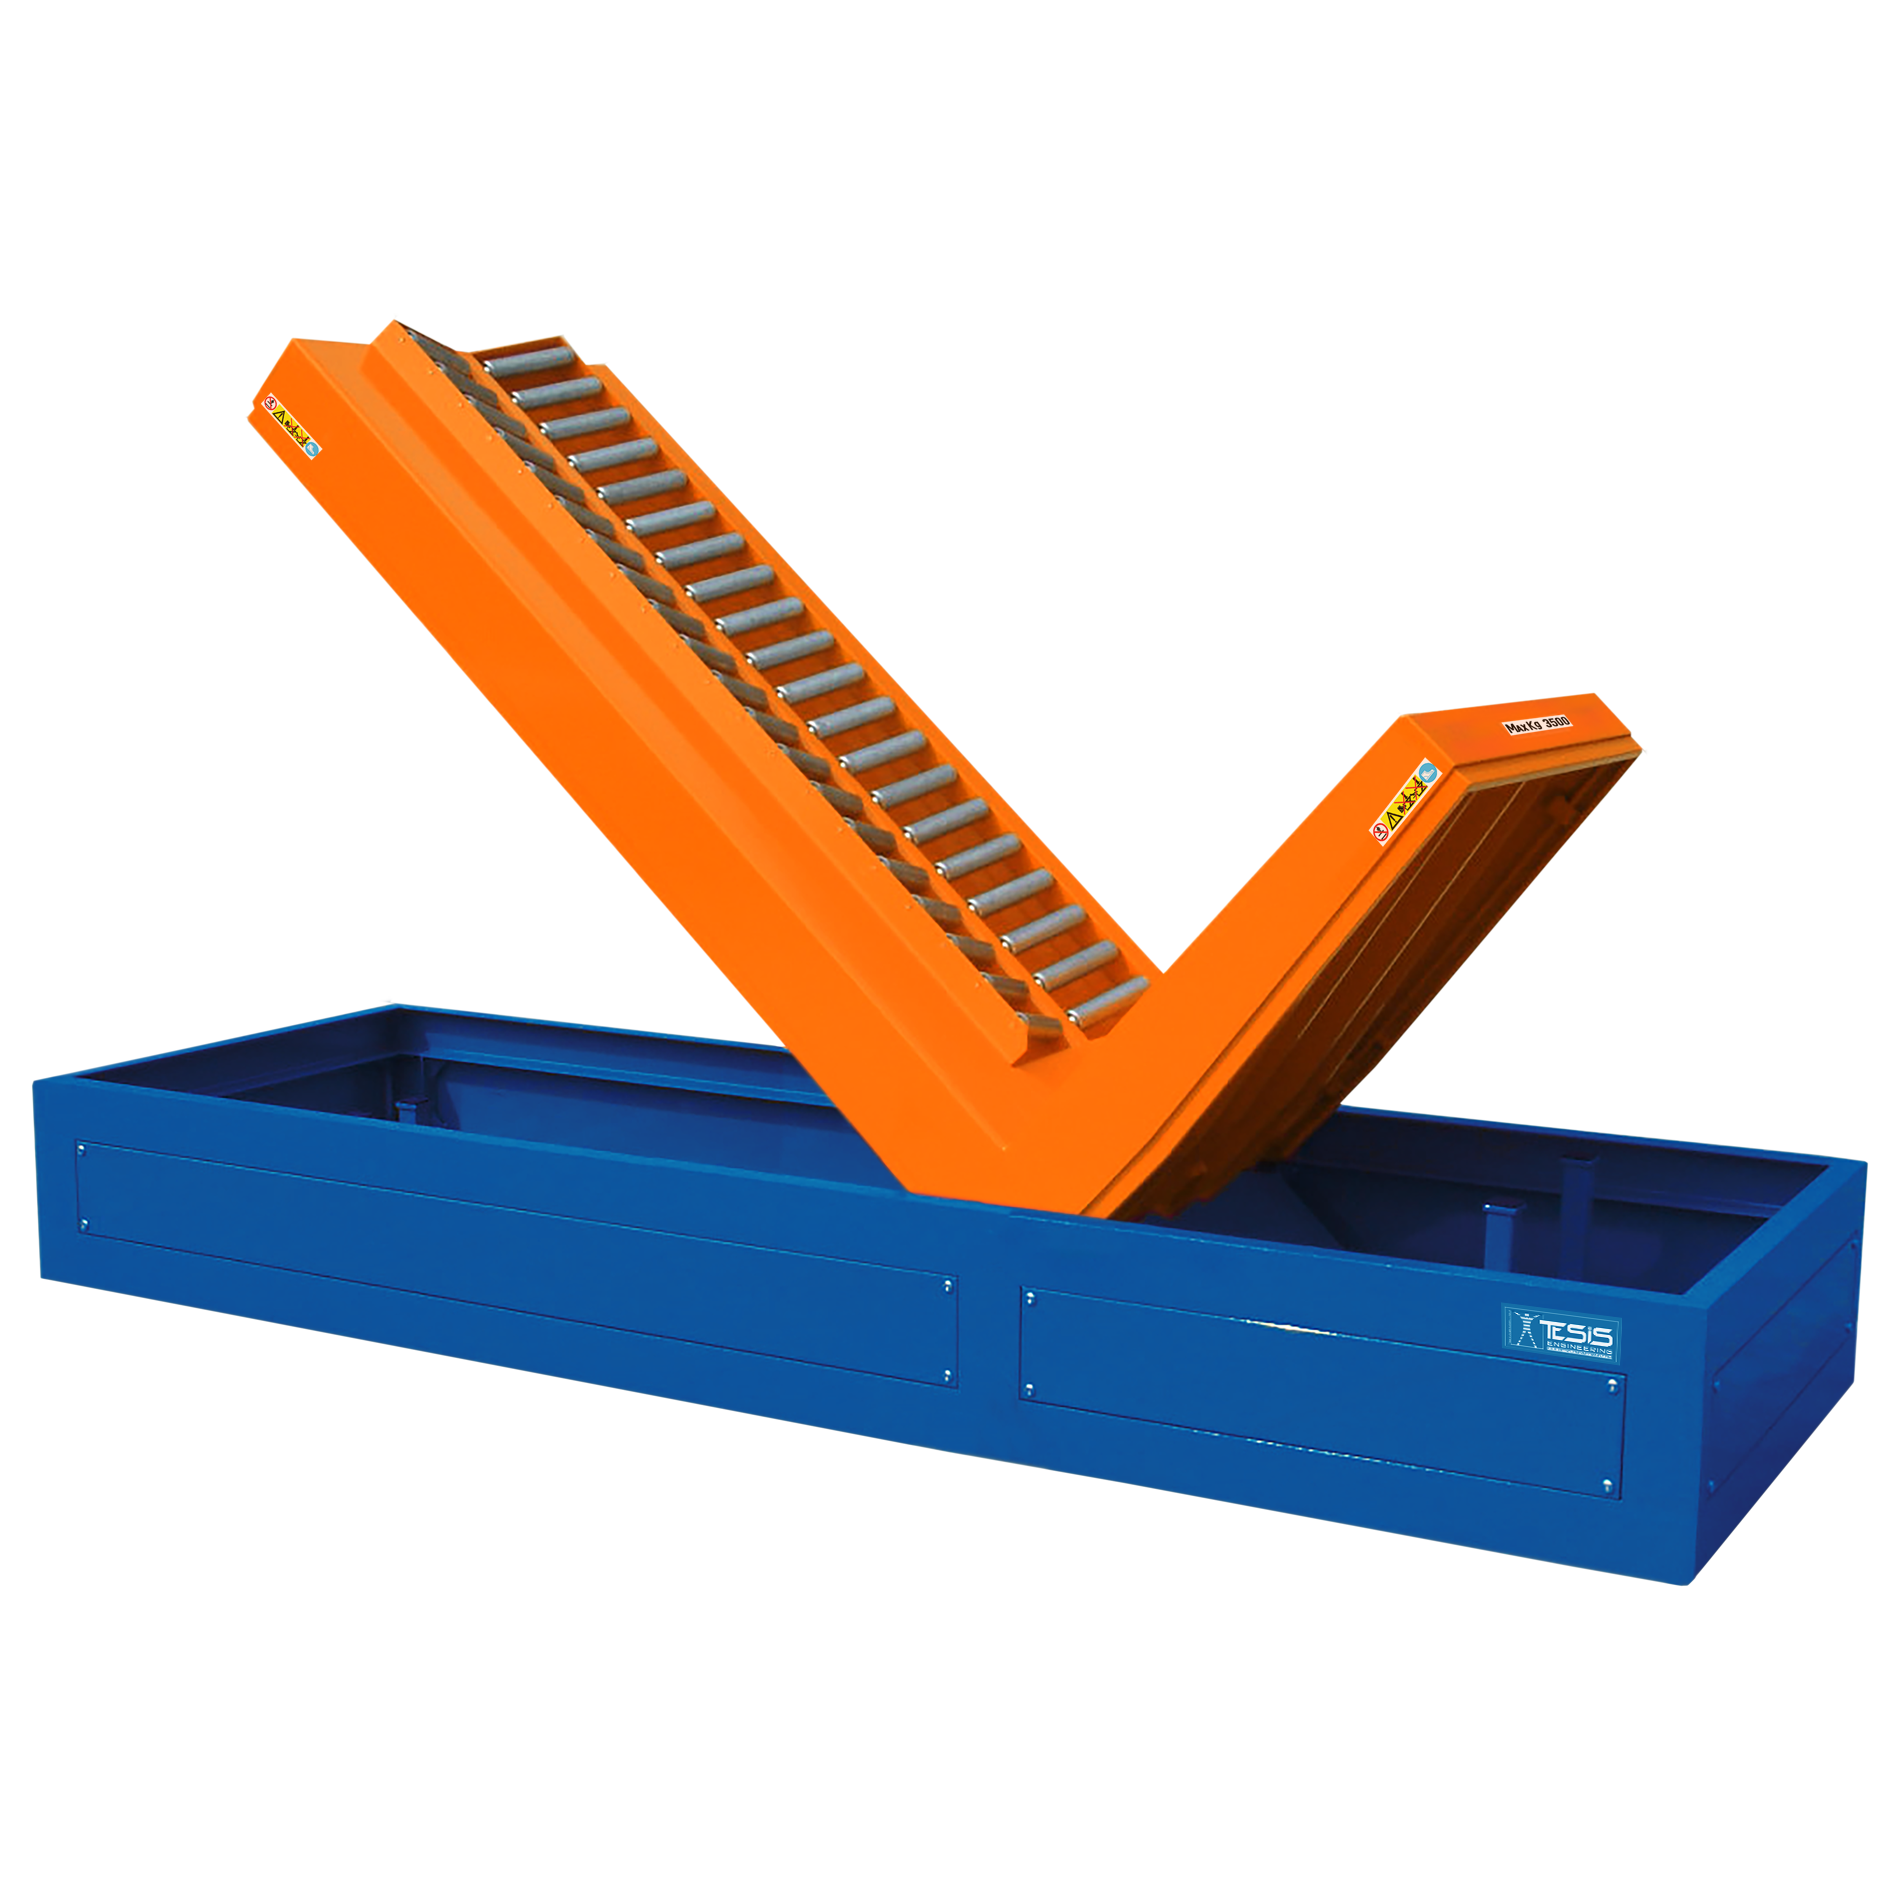 90° hydraulic tipper with V roller conveyor top for rools handling, rolls upender, coil upender, coil tilter, coil handling equipment, conveyor top upender